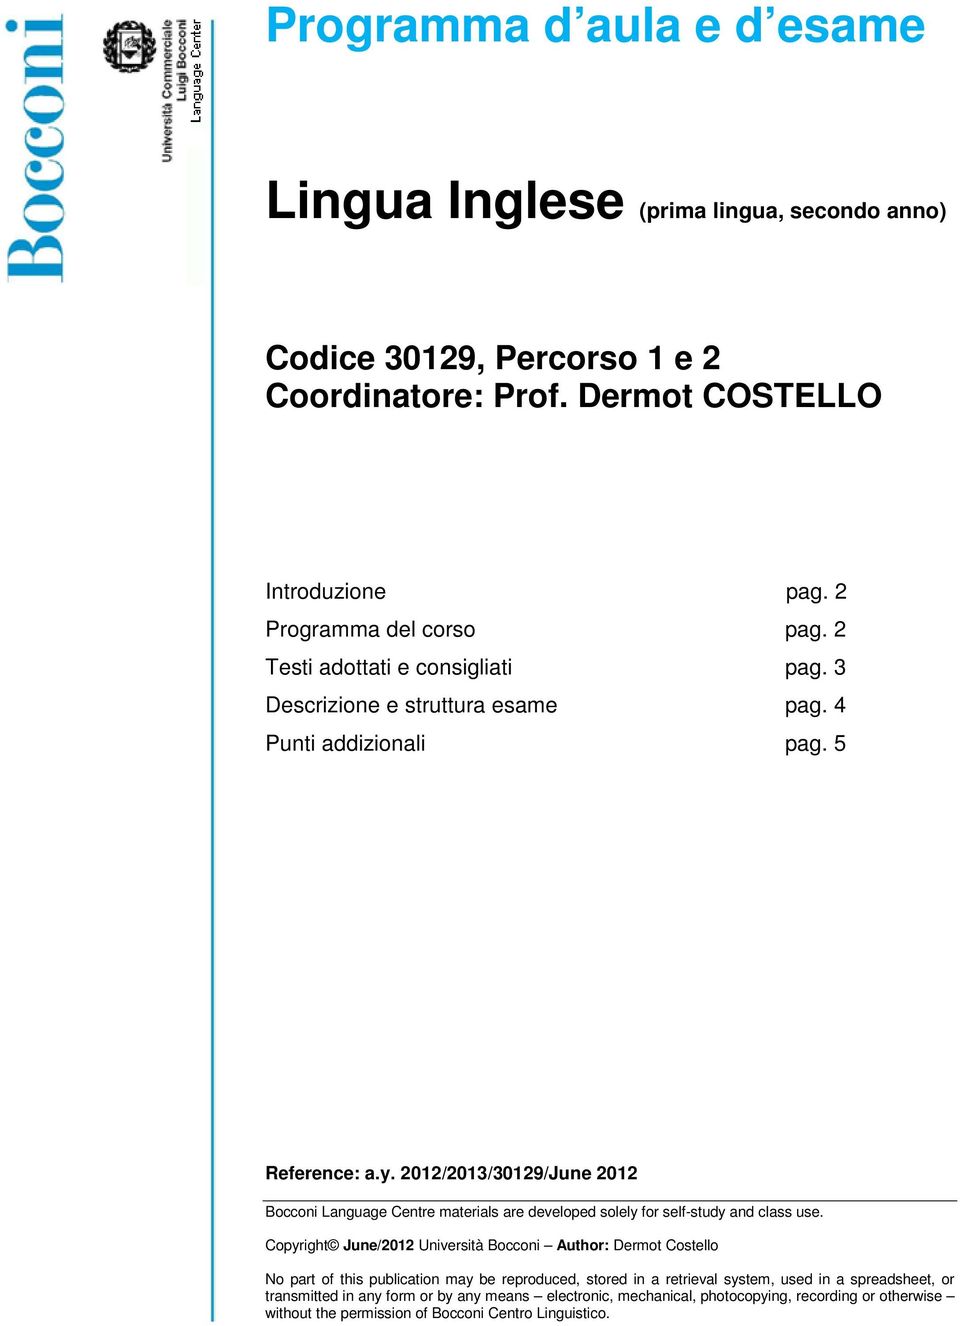 2012/2013/30129/June 2012 Bocconi Language Centre materials are developed solely for self-study and class use.